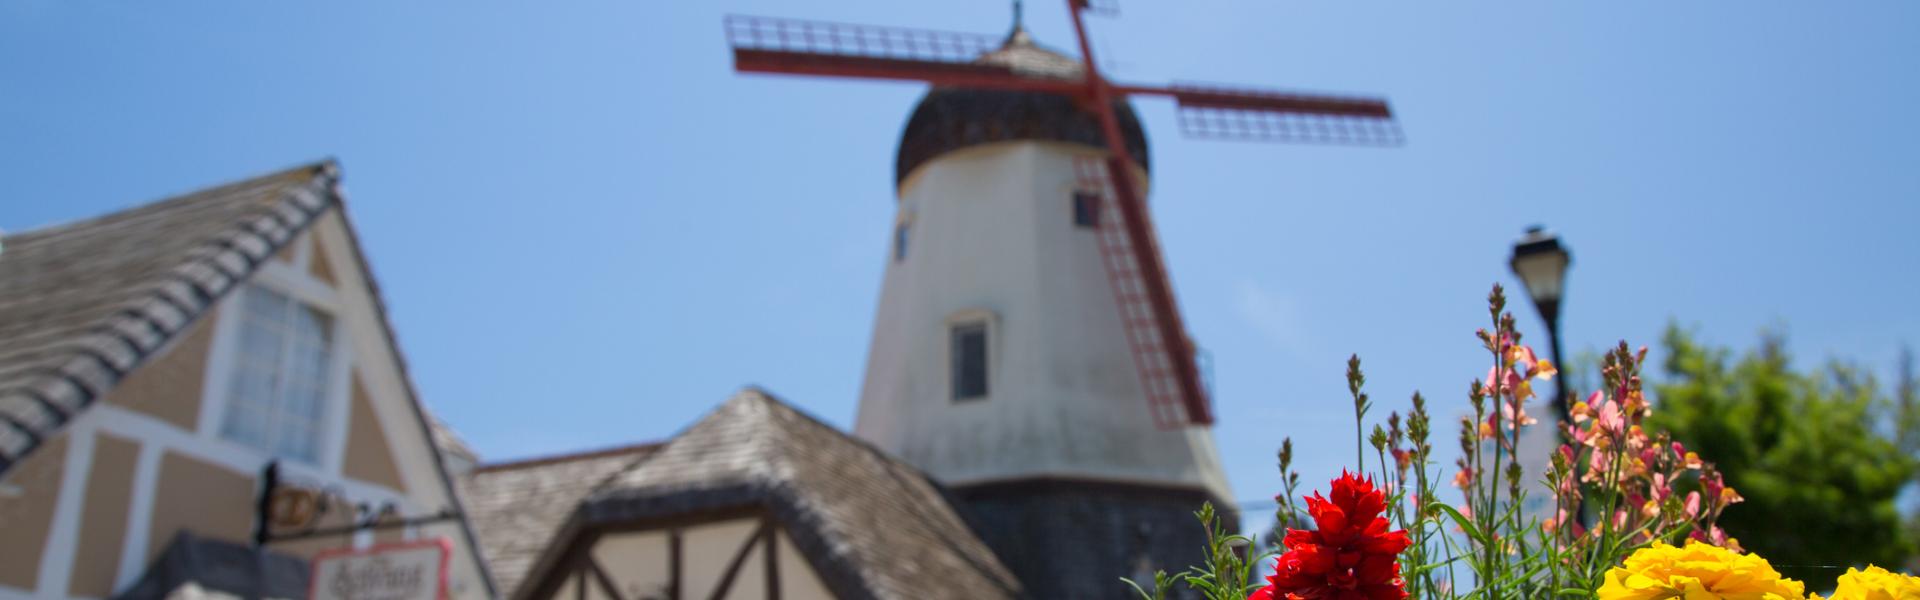 Holiday houses & accommodation in Solvang - HomeToGo